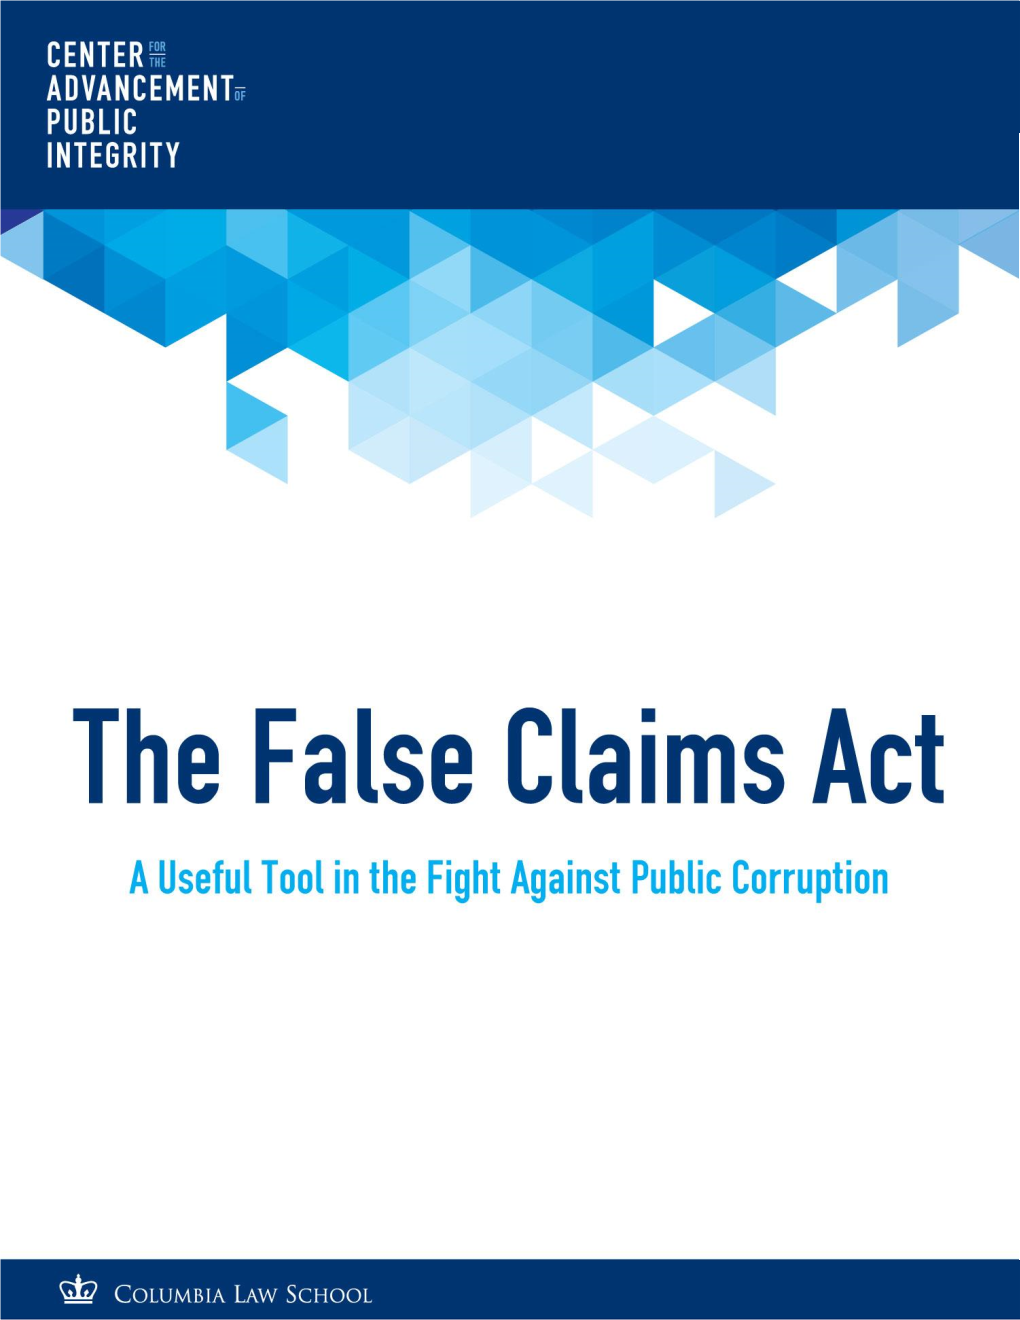 The False Claims Act: a Useful Tool in the Fight Against Public Corruption